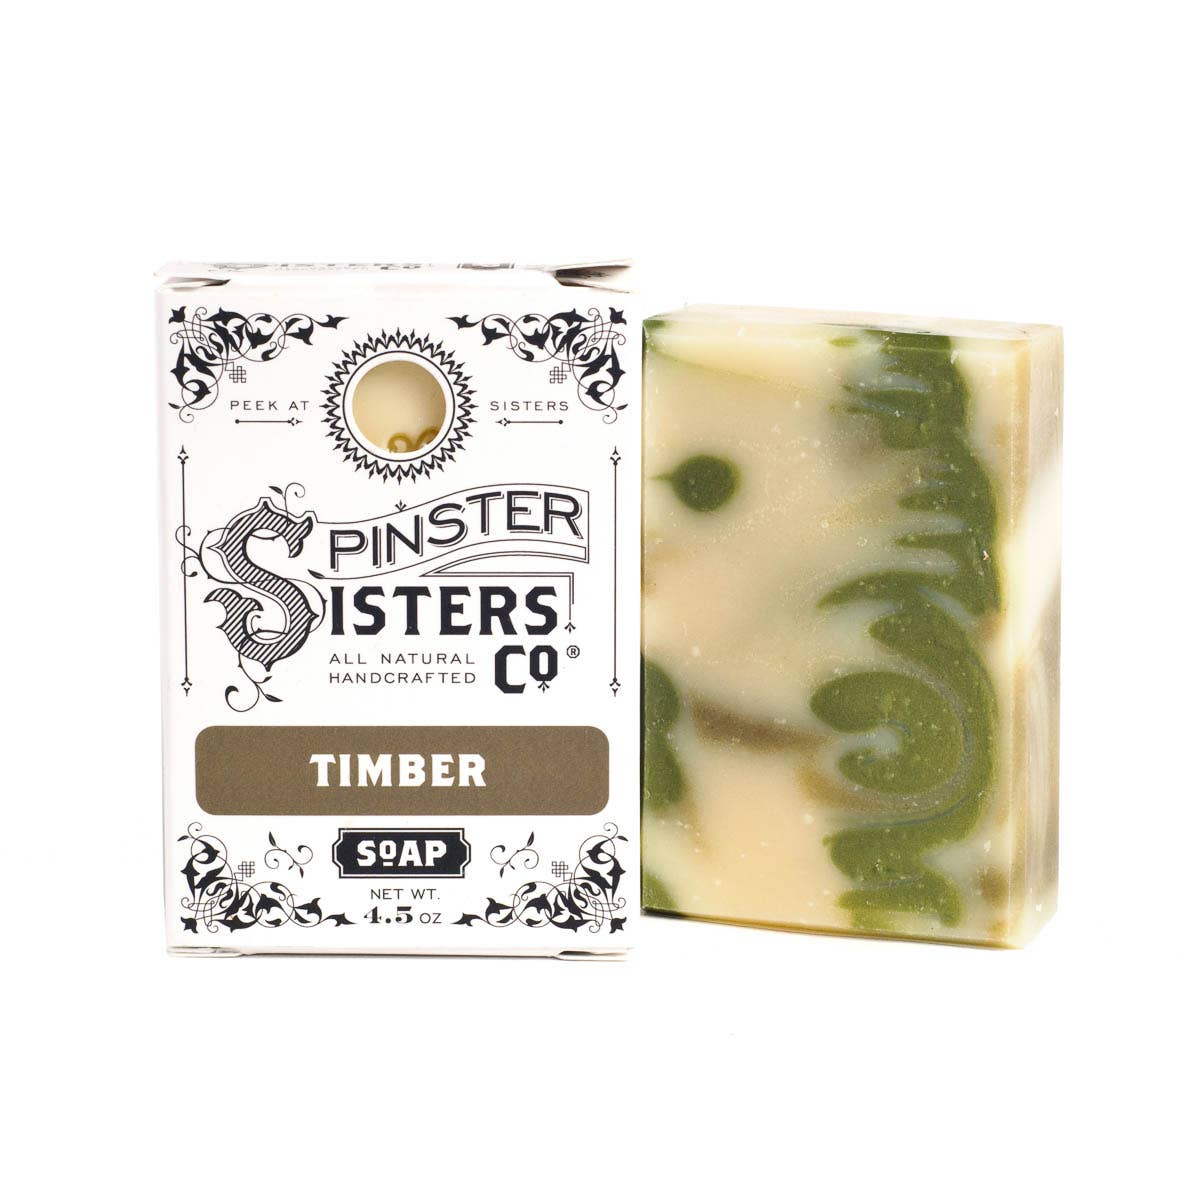 Spinster Sisters Co. Bar Soap 4.5 oz Timber